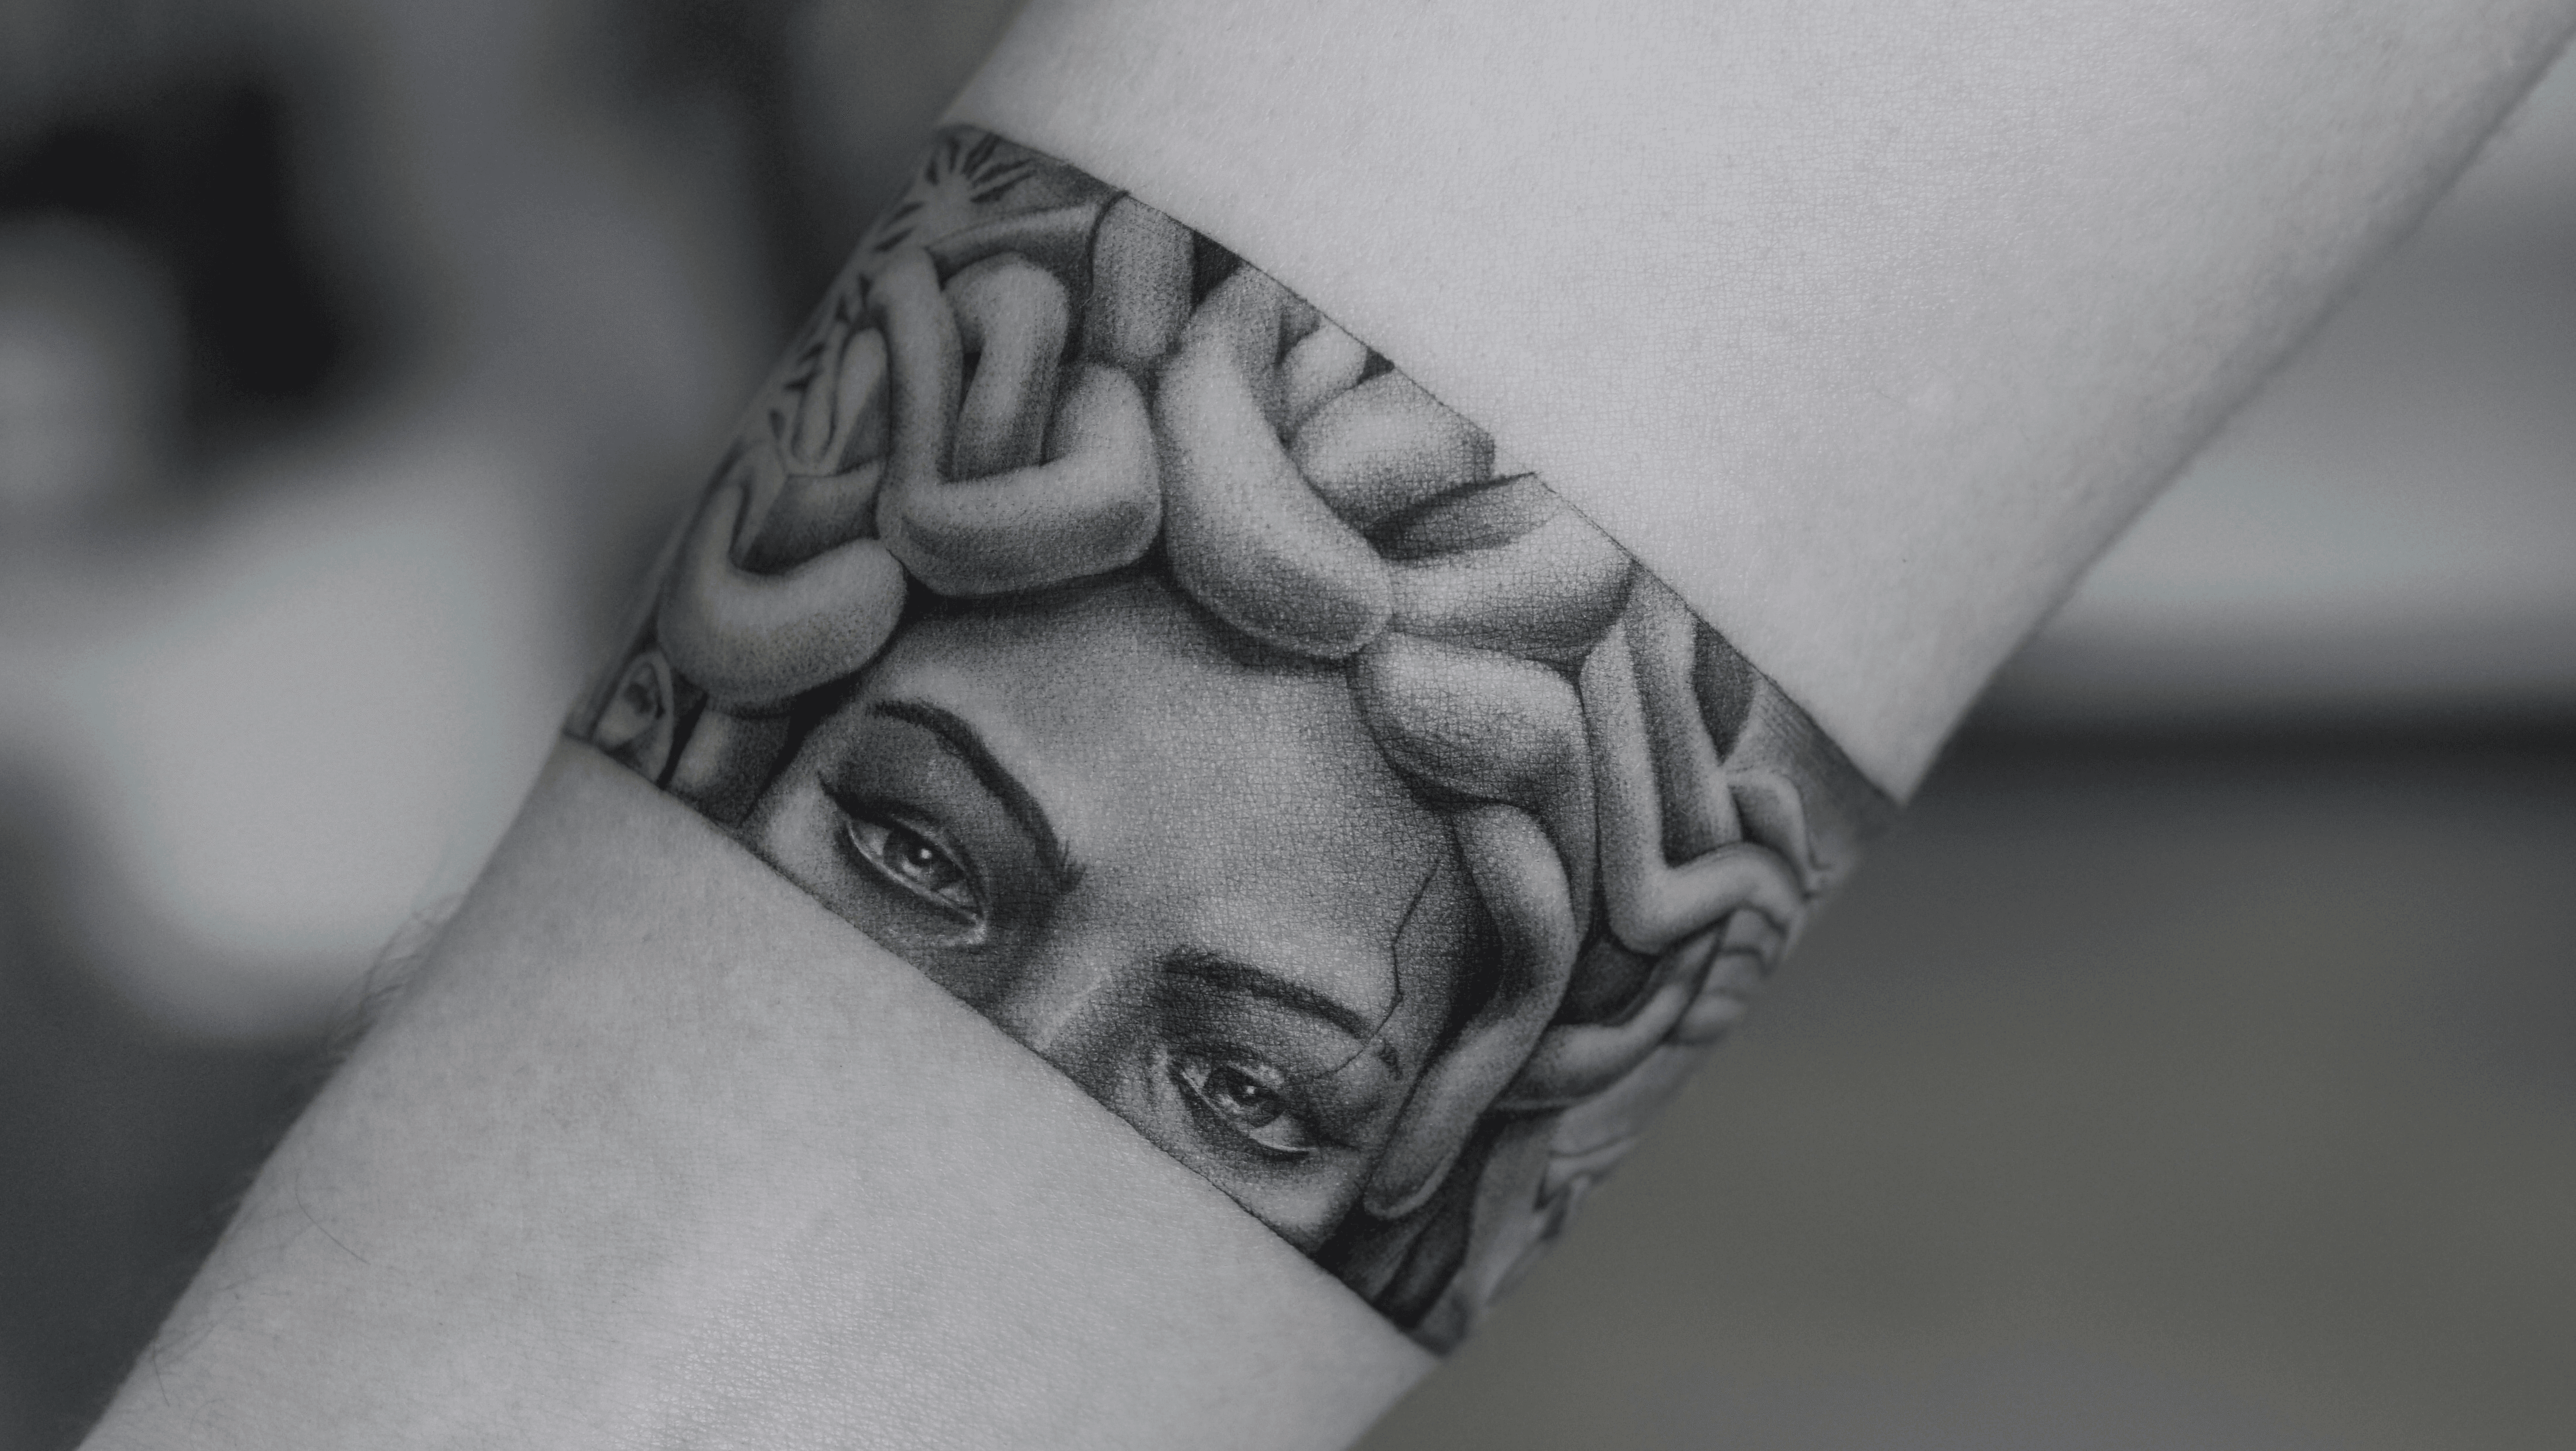 𝘾𝙝𝙚𝙣𝙣𝙖𝙞 𝙗𝙚𝙨𝙩 𝙩𝙖𝙩𝙩𝙤𝙤 𝙨𝙩𝙪𝙙𝙞𝙤 on Instagram The Medusa  tattoo can mean many things but its generally a symbol of survival  strength and overcoming assault 𝙈𝙞𝙘𝙧𝙤 𝙍𝙚𝙖𝙡𝙞𝙨𝙩𝙞𝙘 𝙏𝙖𝙩𝙩𝙤𝙤  𝙙𝙤𝙣𝙚 𝙗𝙮 𝘼𝙧𝙖𝙫𝙞𝙣𝙙 